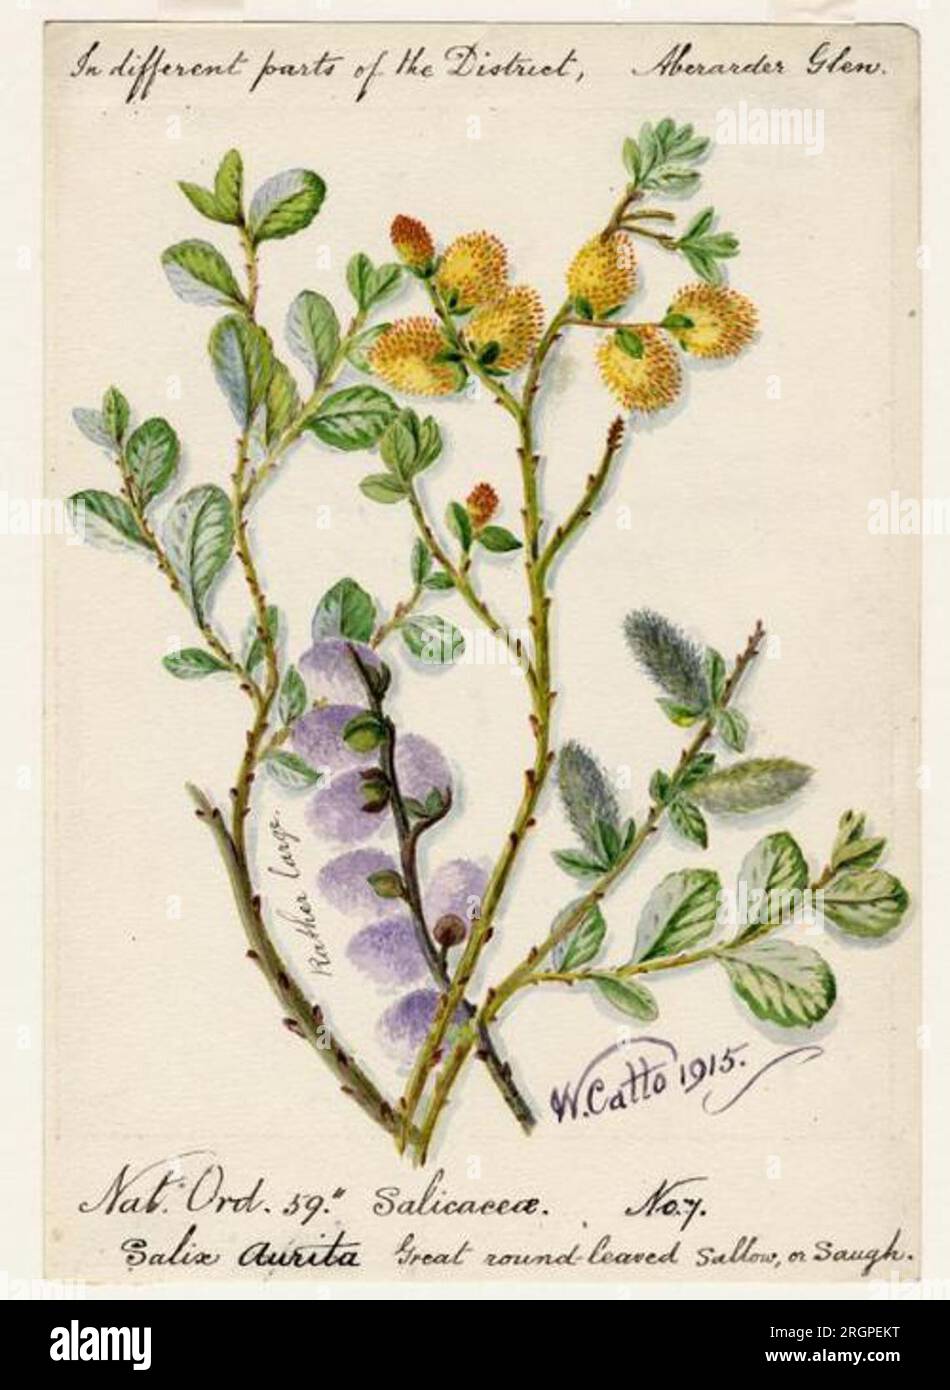 Great round-leaved Sallow, or Saugh (Salix Aurita) - William Catto 1915 by William Catto Stock Photo